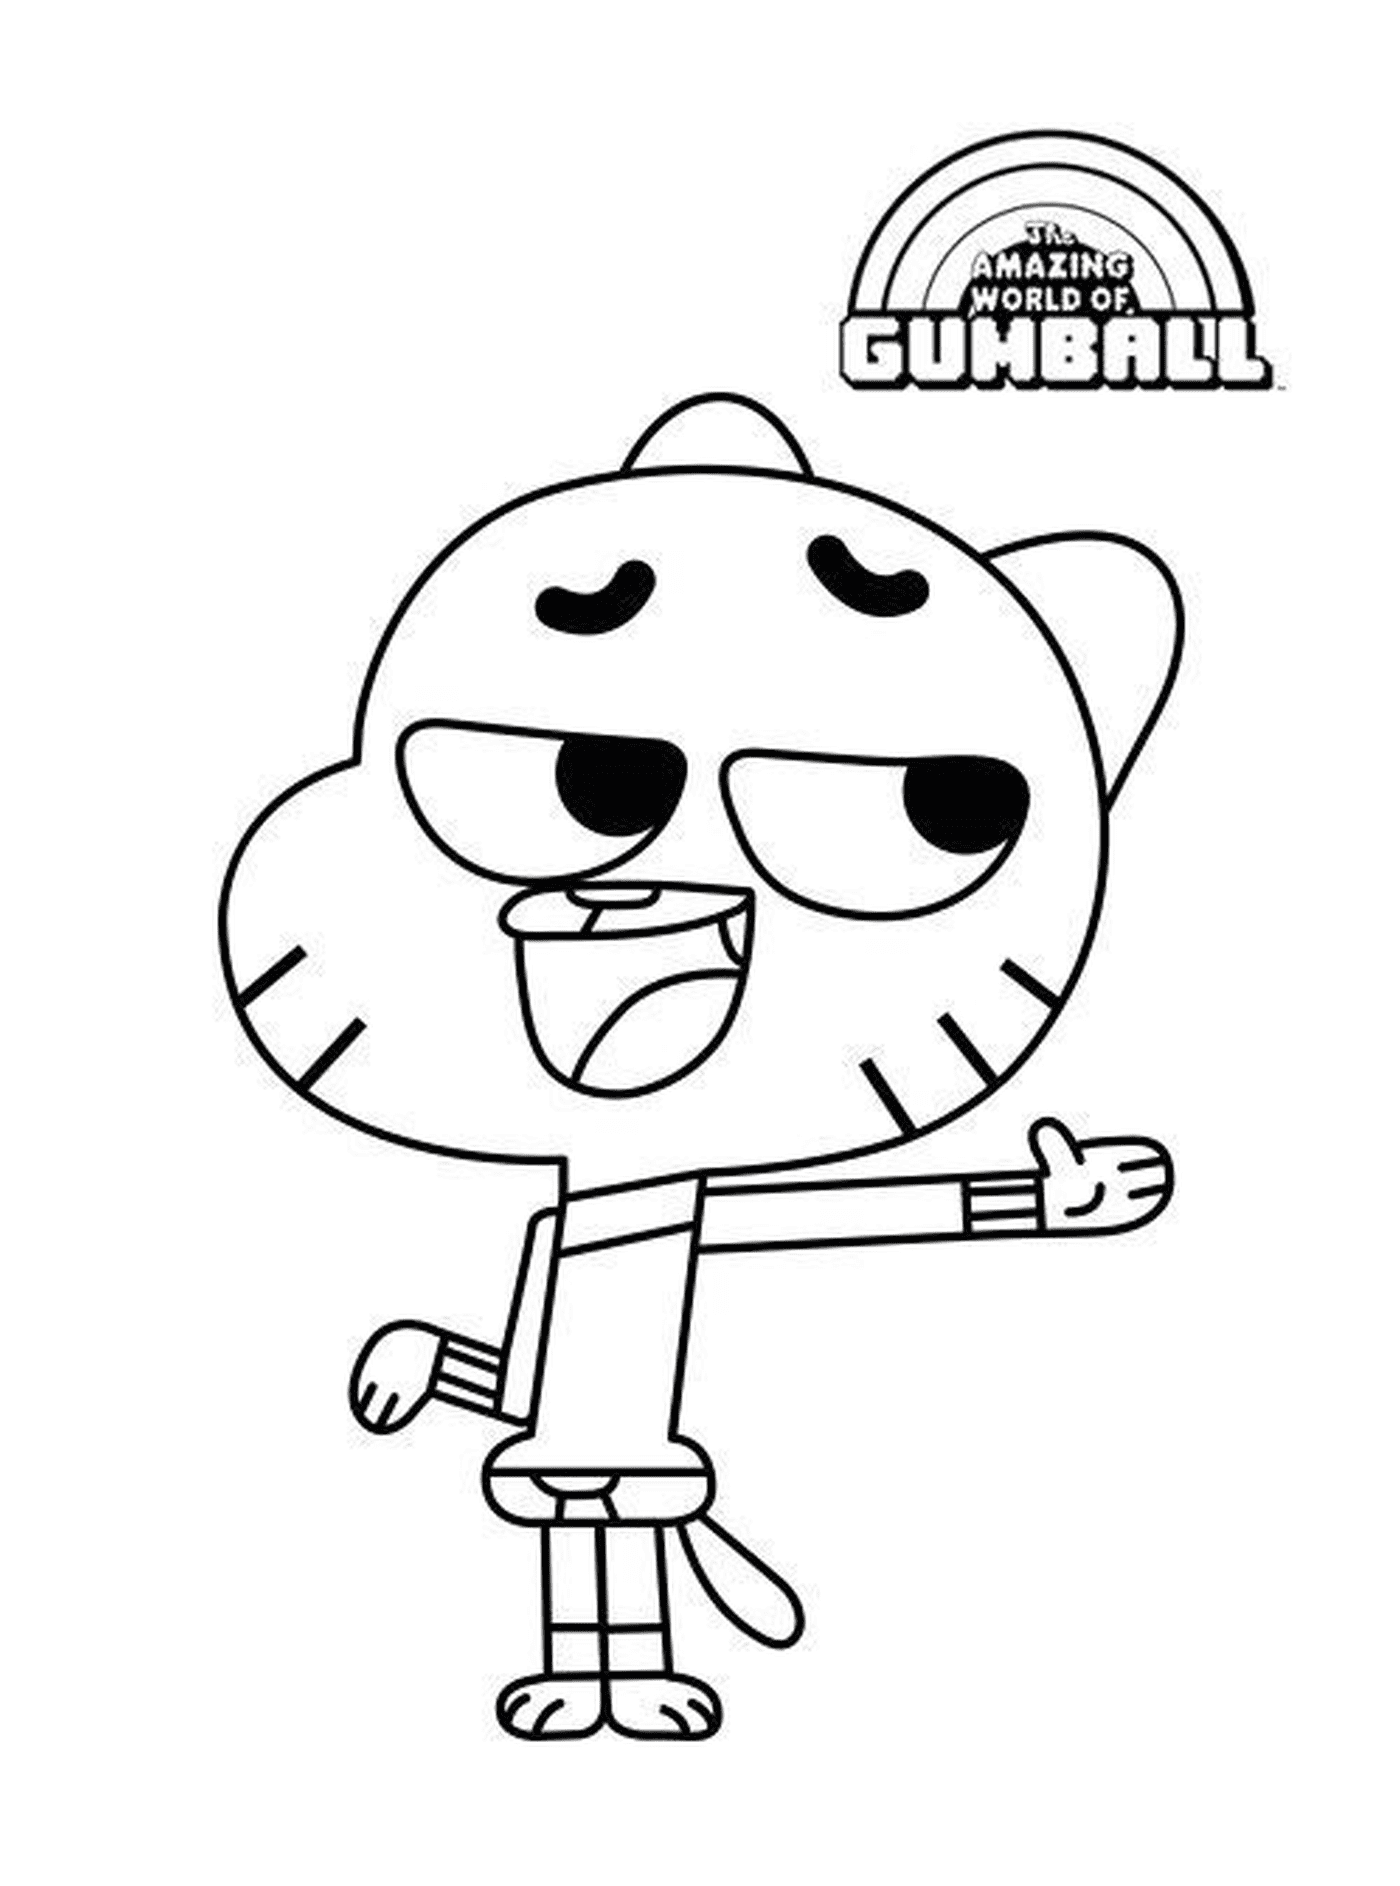  Gumball in a fantastic world 